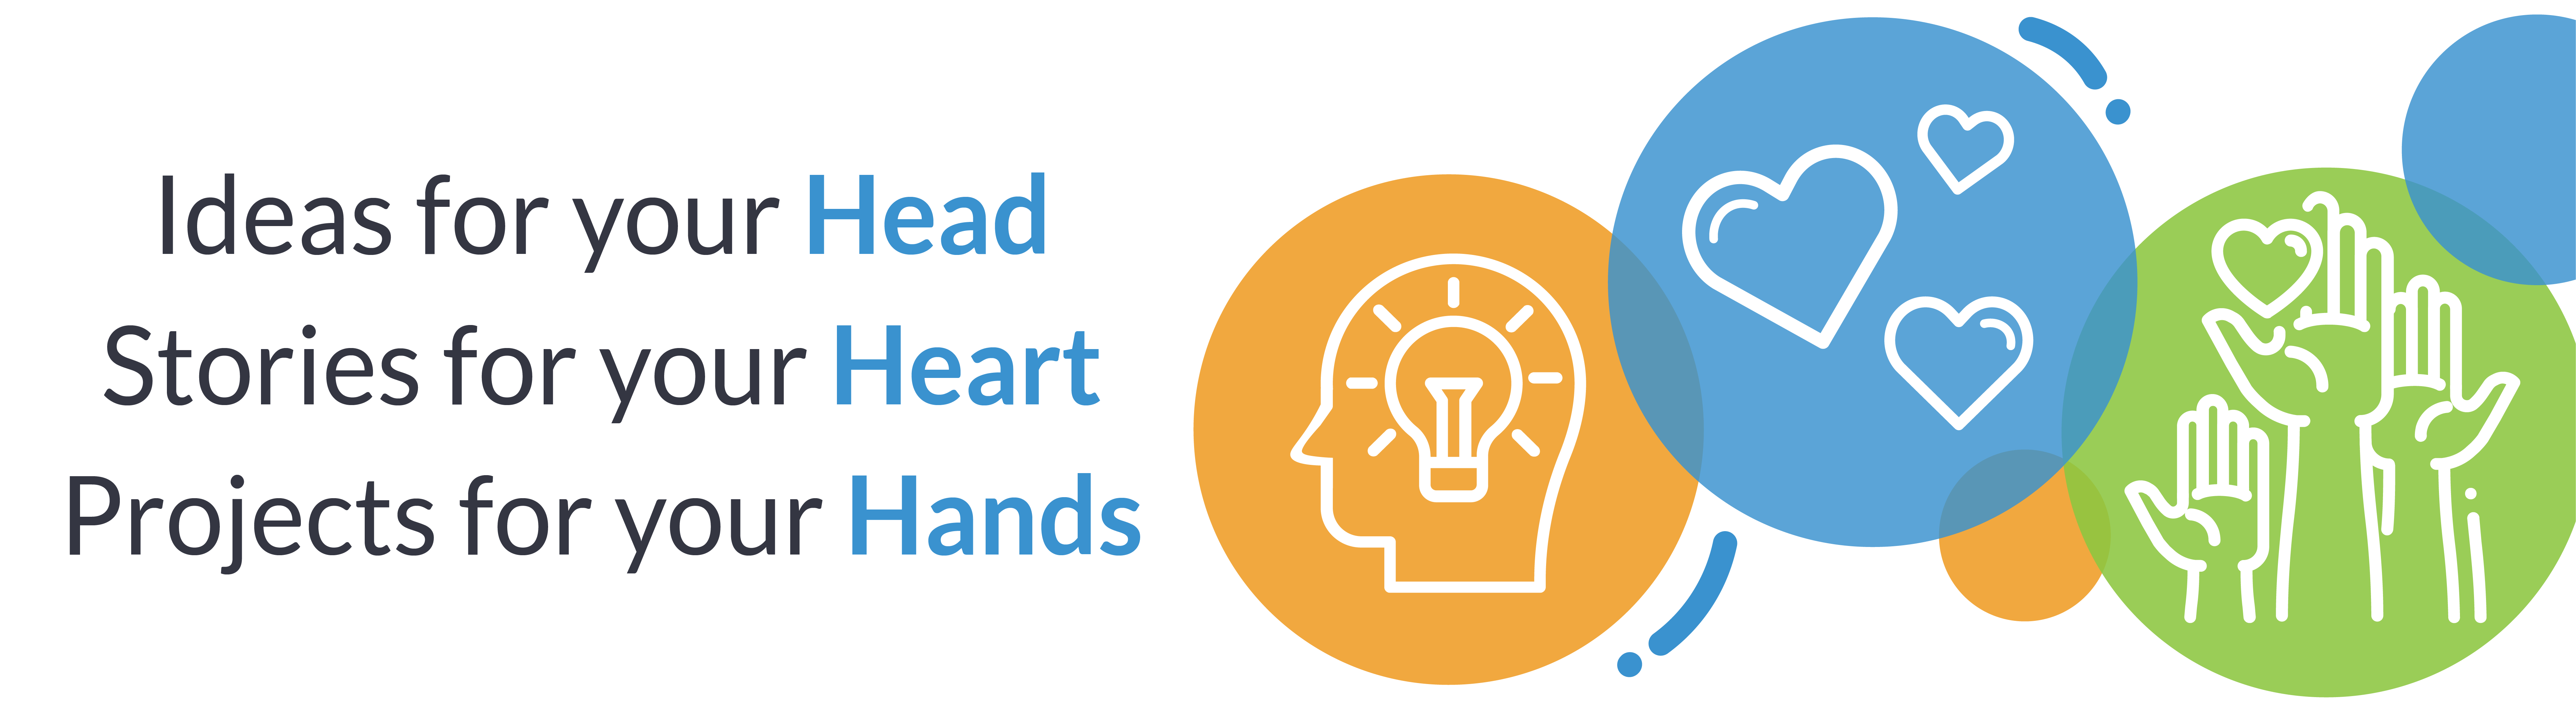 Idea for your Head, Stories for your Heart, Projects for your Hands.